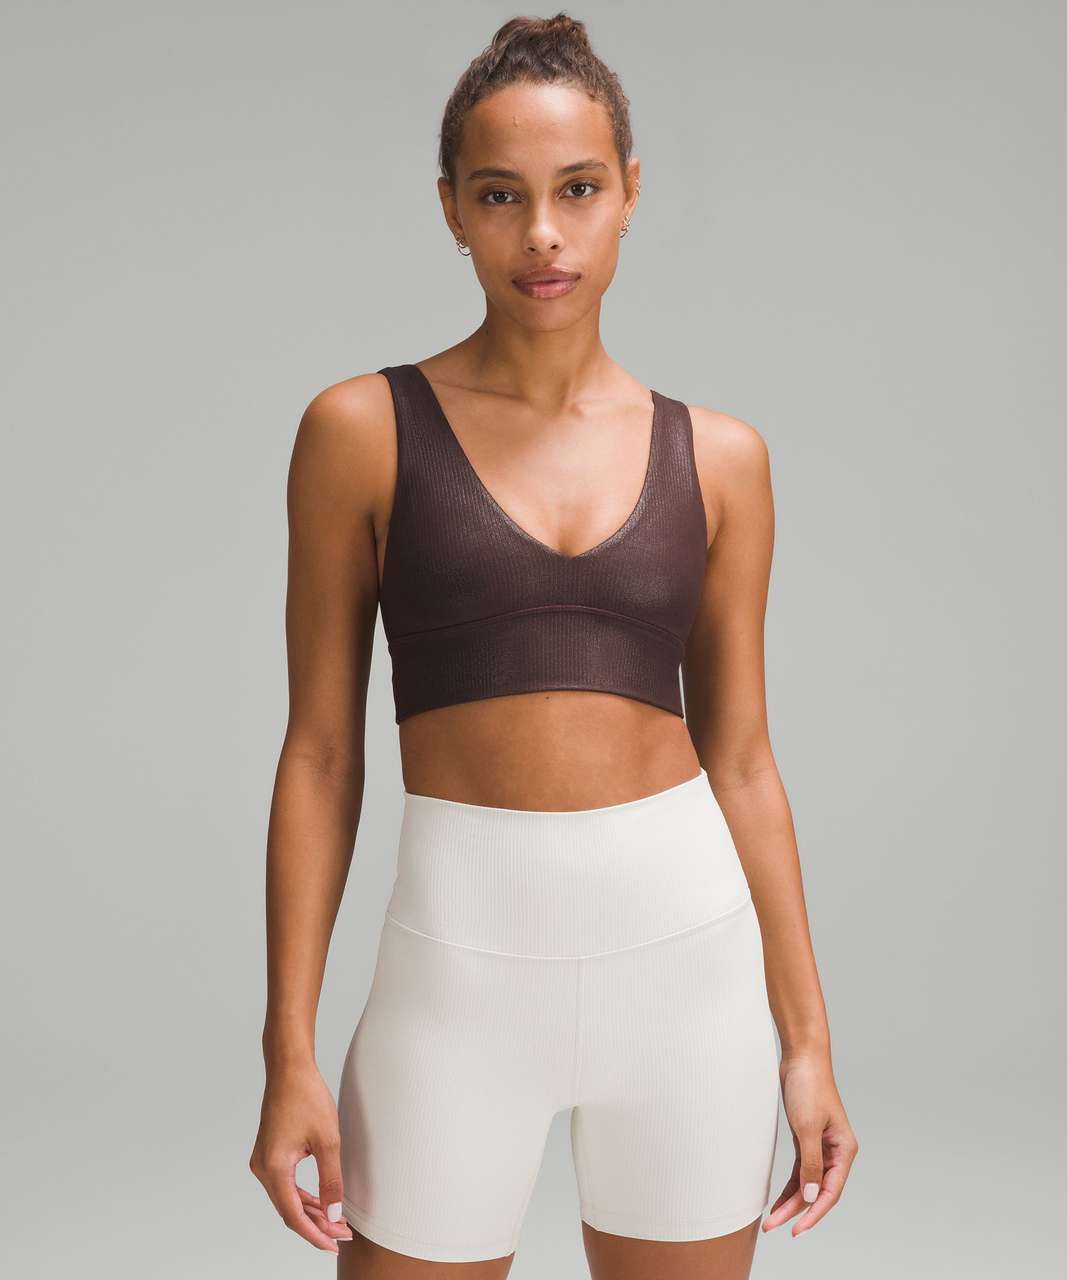 Align Asymmetrical Bra in Espresso! These might be my new favorite